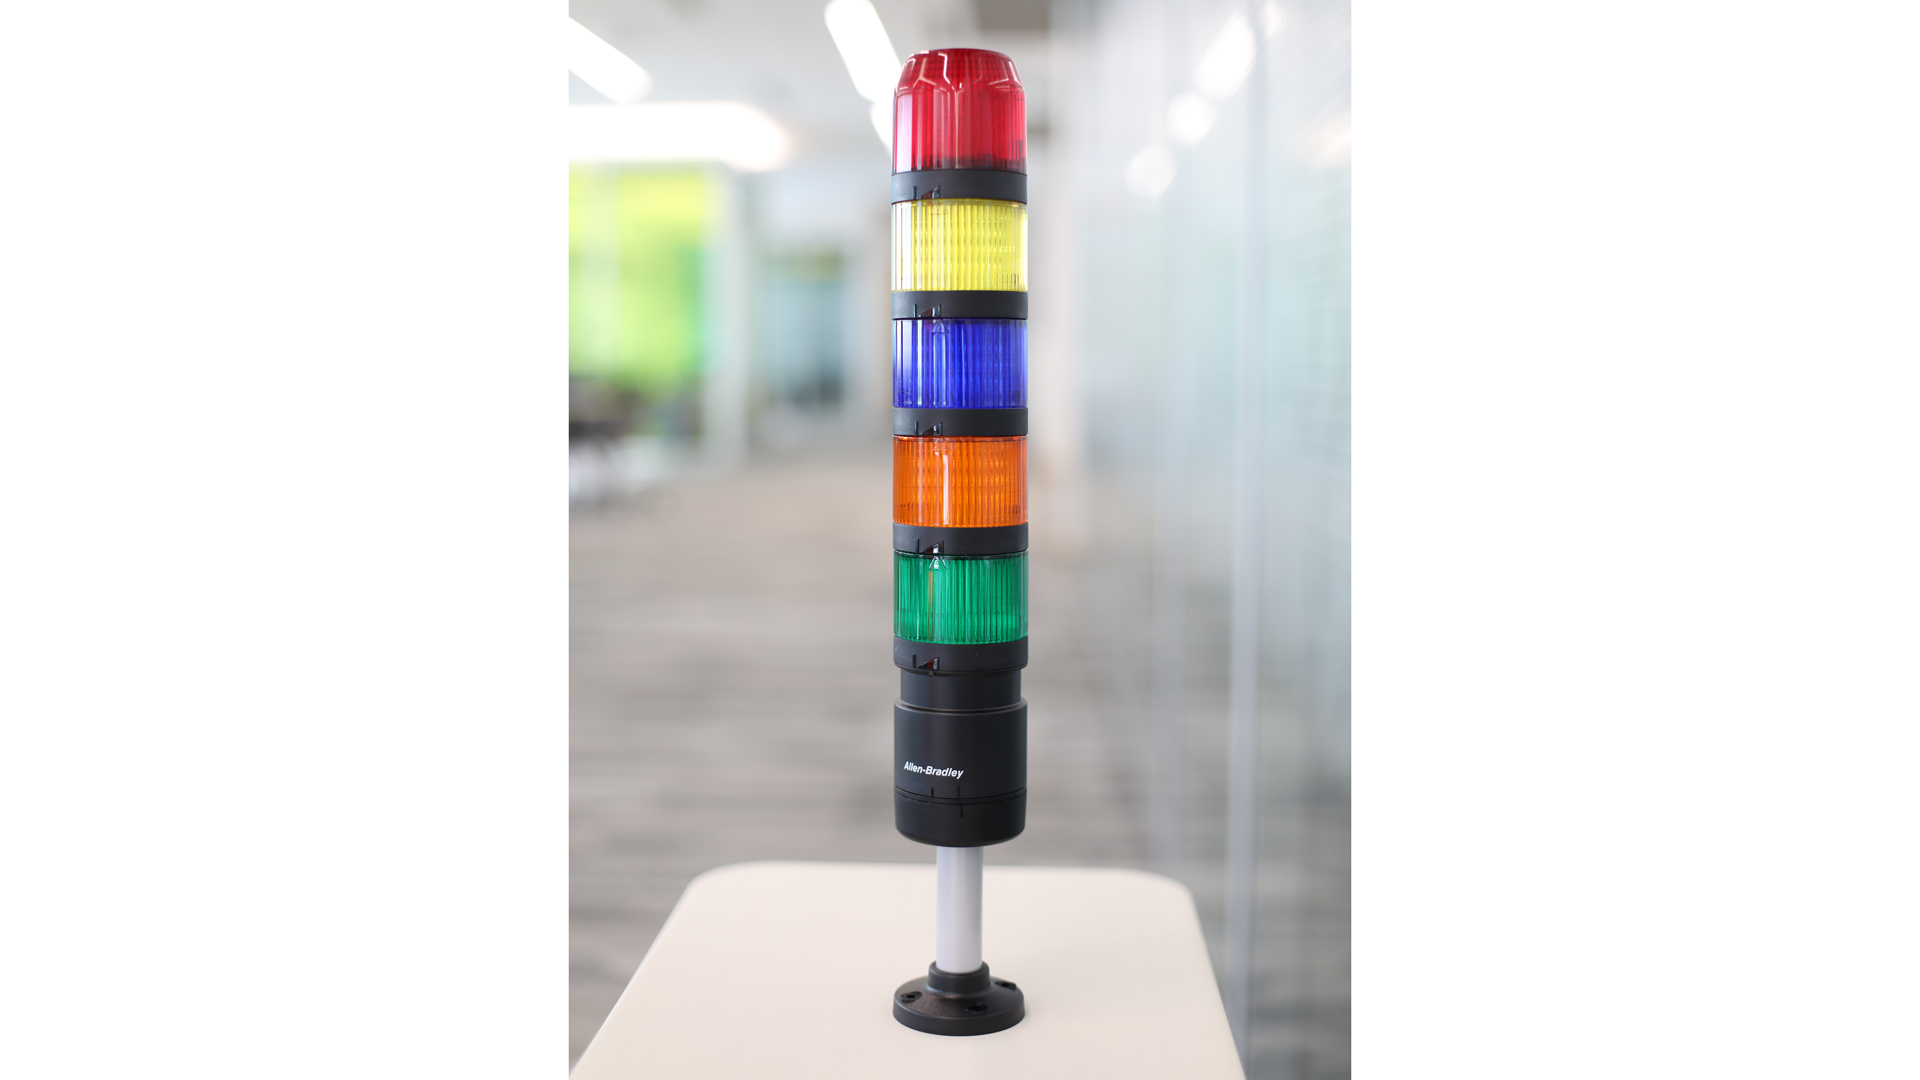 IO-Link stack light on table- from top to bottom - red, yellow, blue, amber and green unlit light modules, black pole mount 